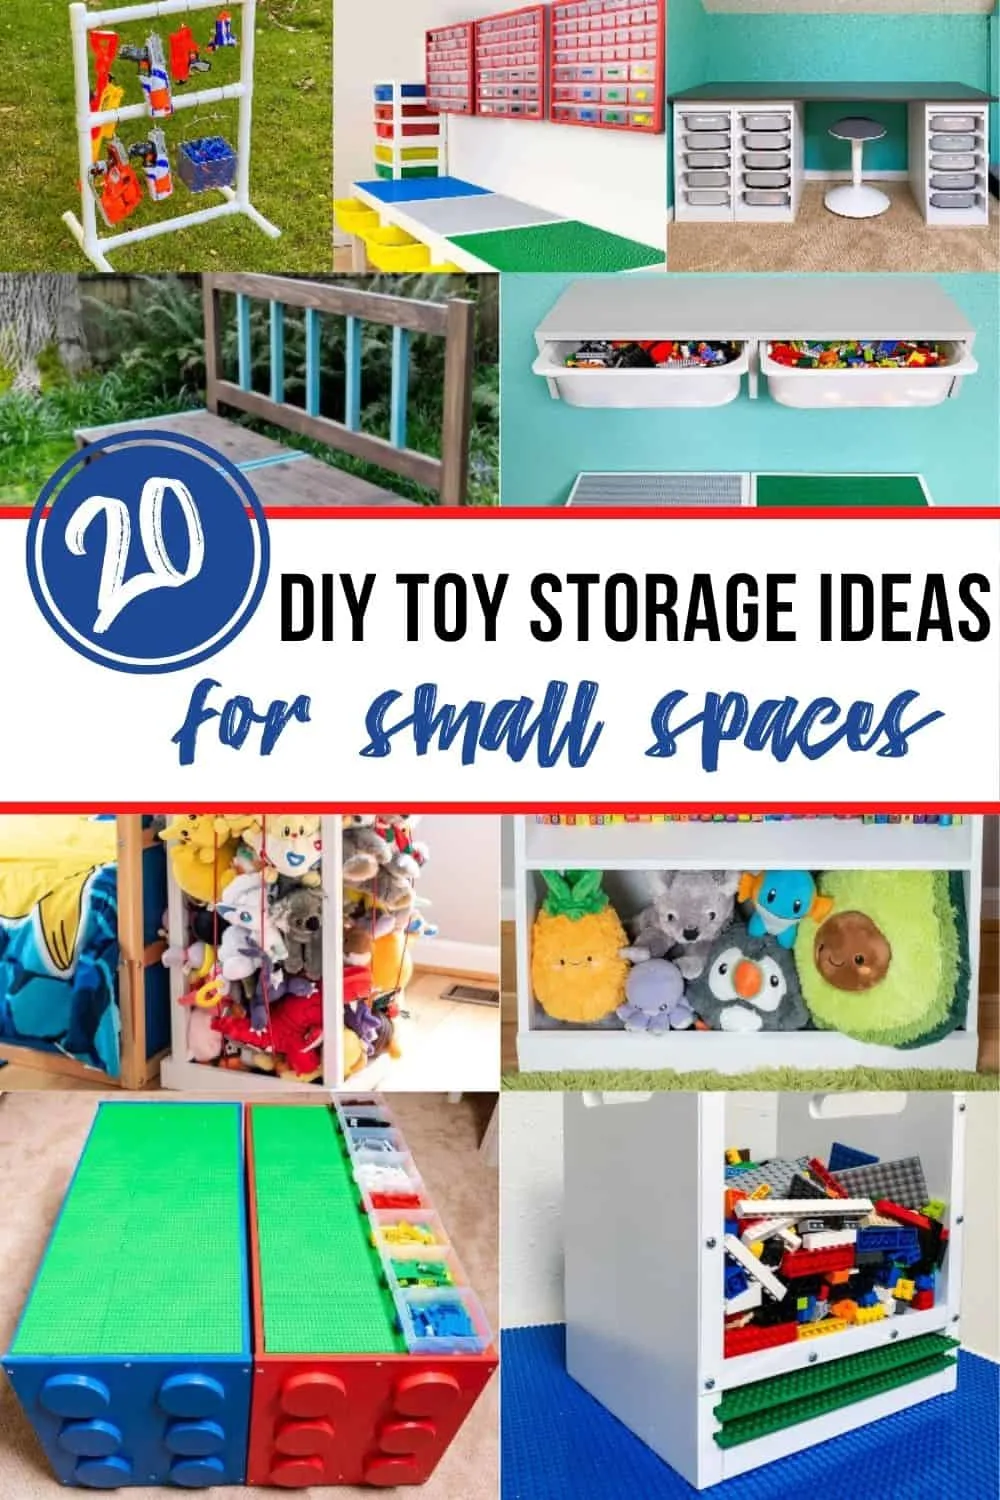 20 Diy Toy Storage Ideas For Small Es The Handyman S Daughter